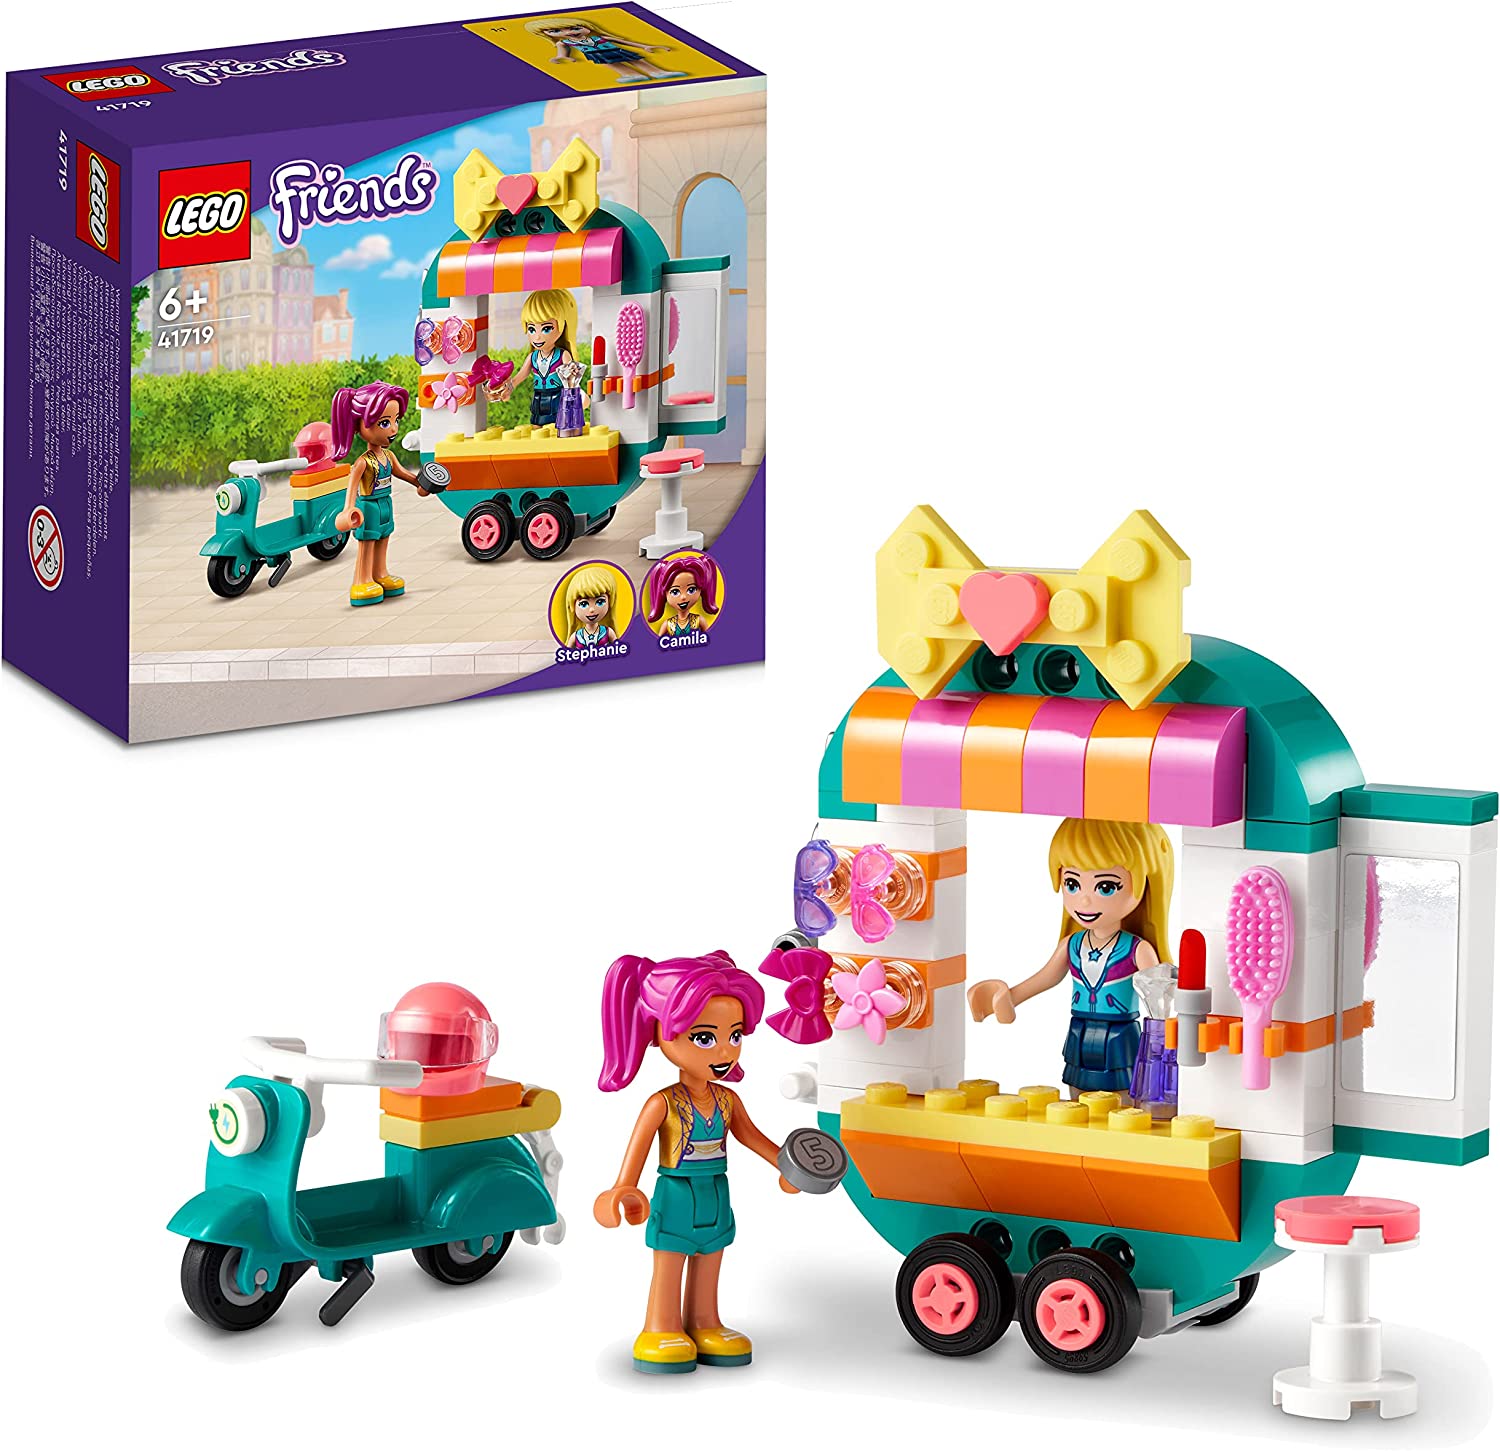 LEGO 41719 Friends Mobile Fashion Boutique with Hairdressing Salon and Mini Dolls Stephanie & Camila, Toy for Girls and Boys from 6 Years